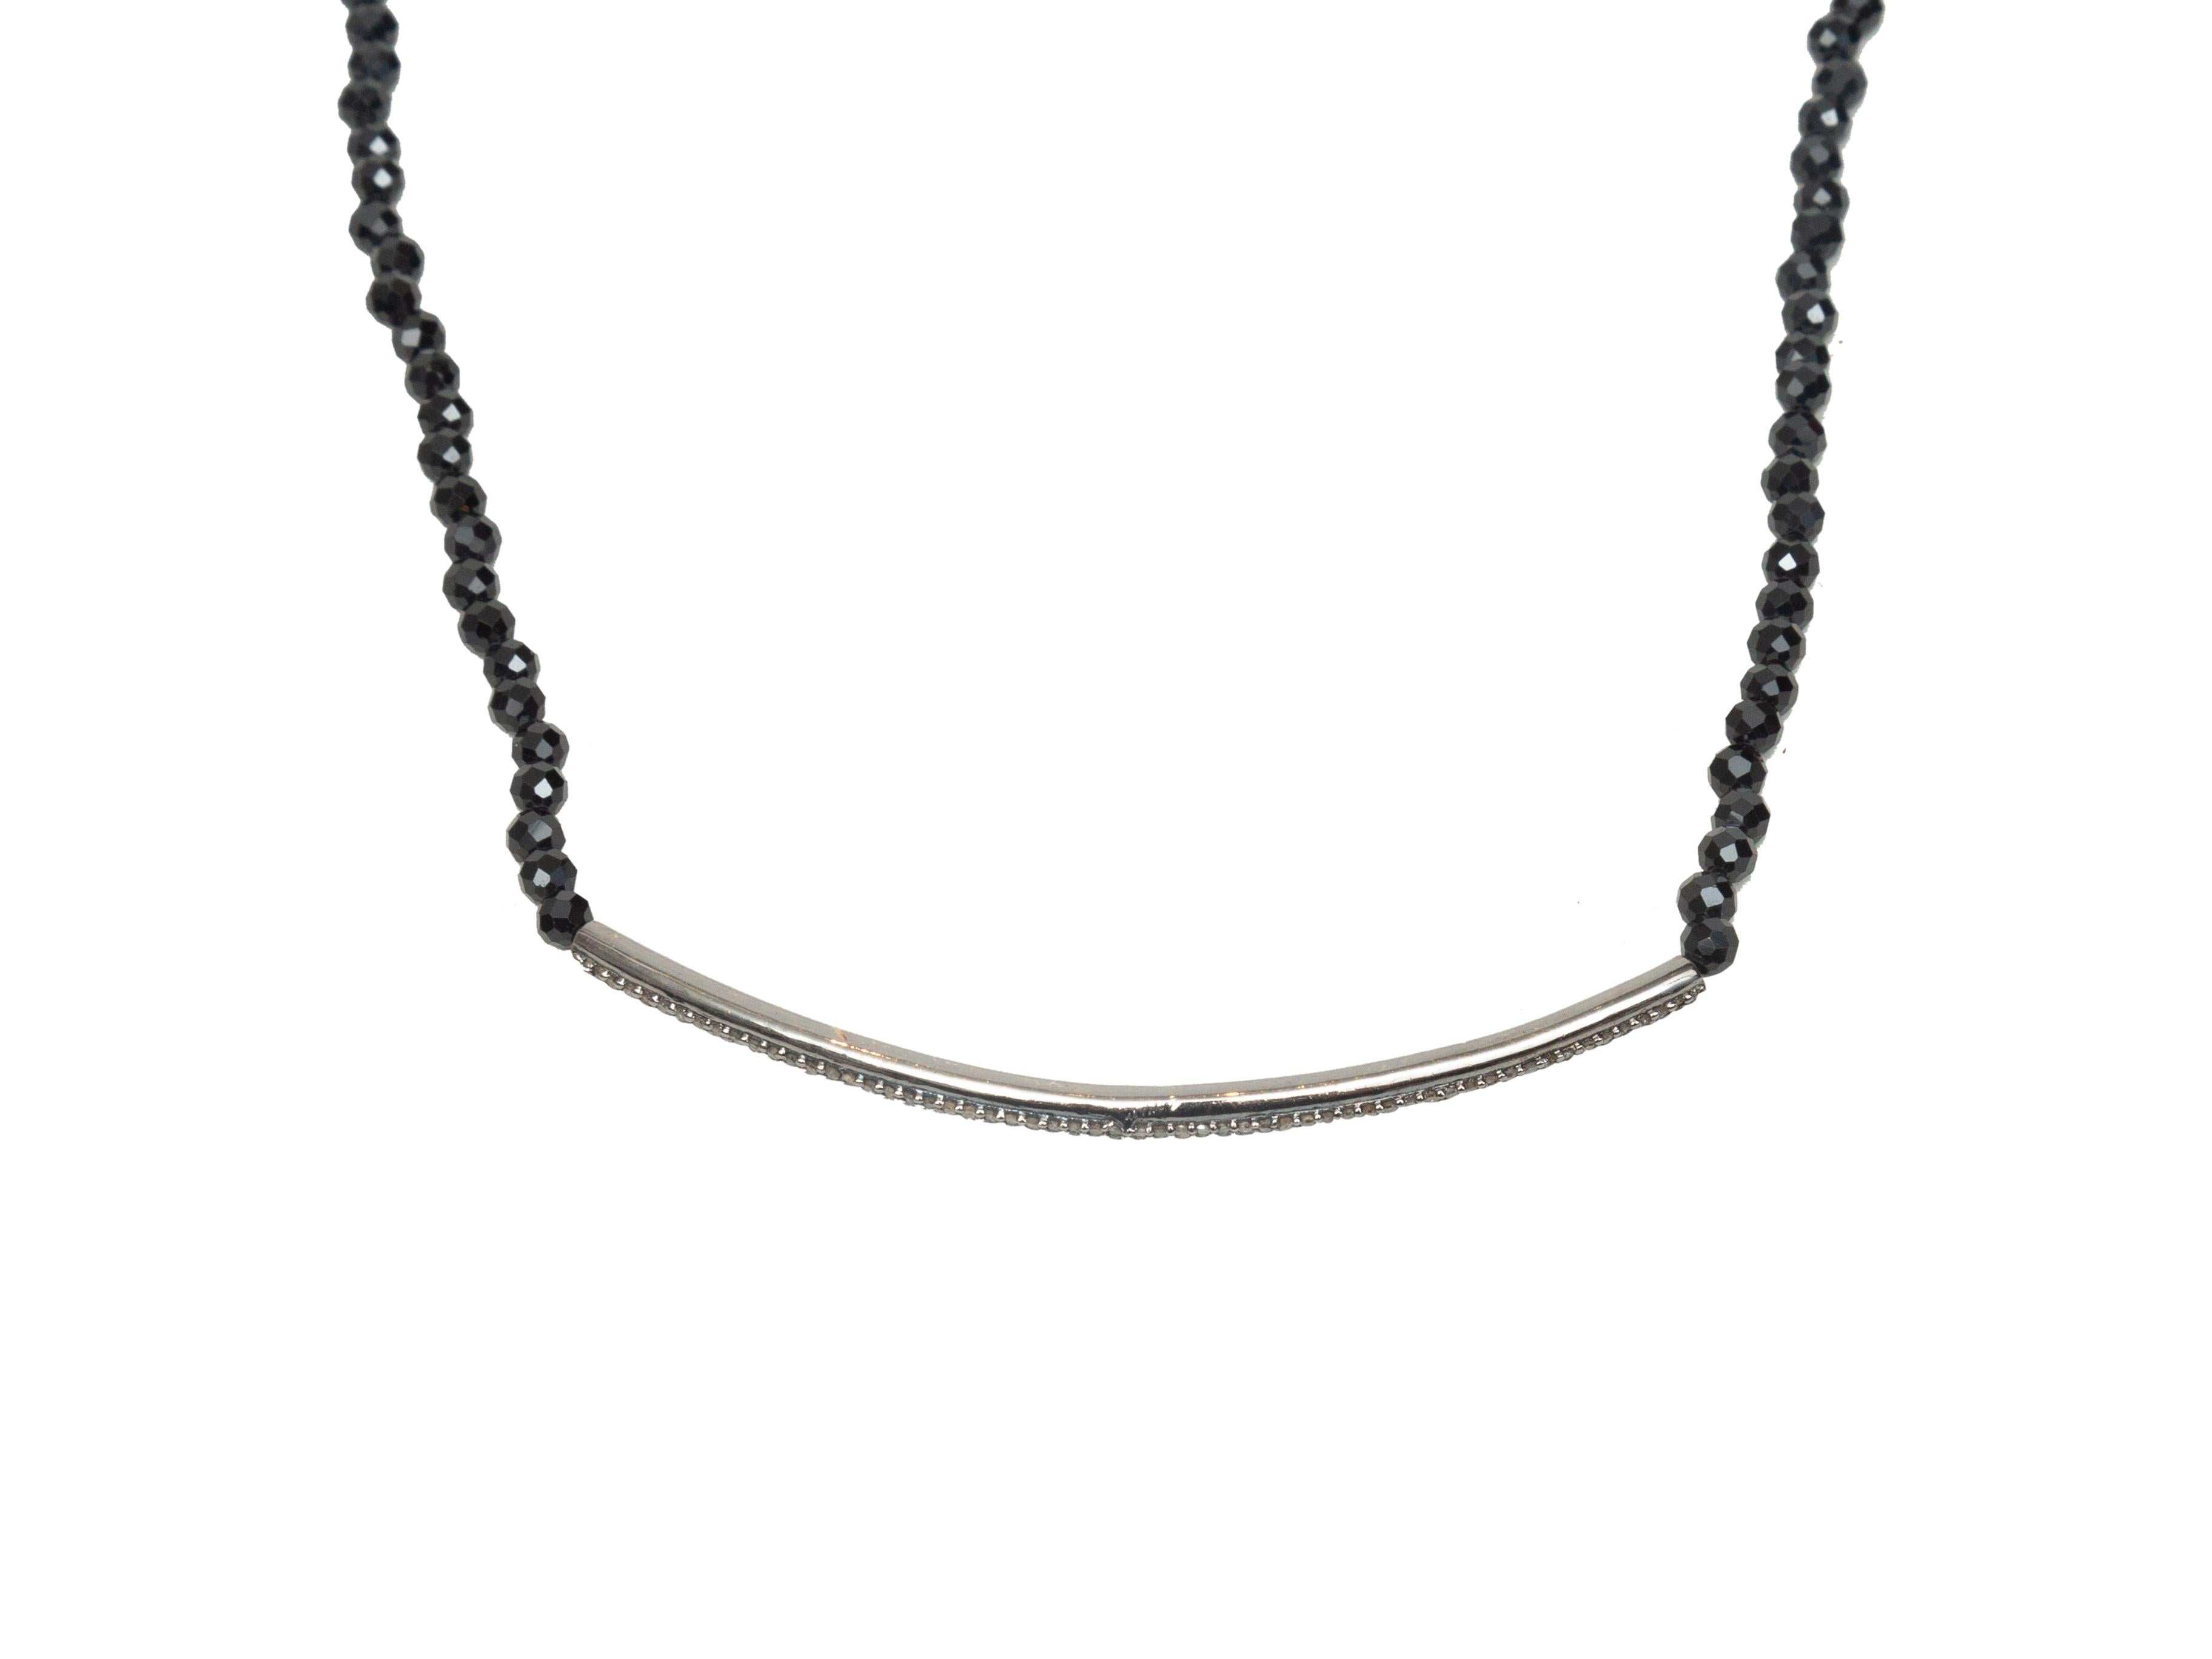 Product details: Black stone and diamond-accented sterling silver necklace by Bavna. Lobster claw closure at end. 23